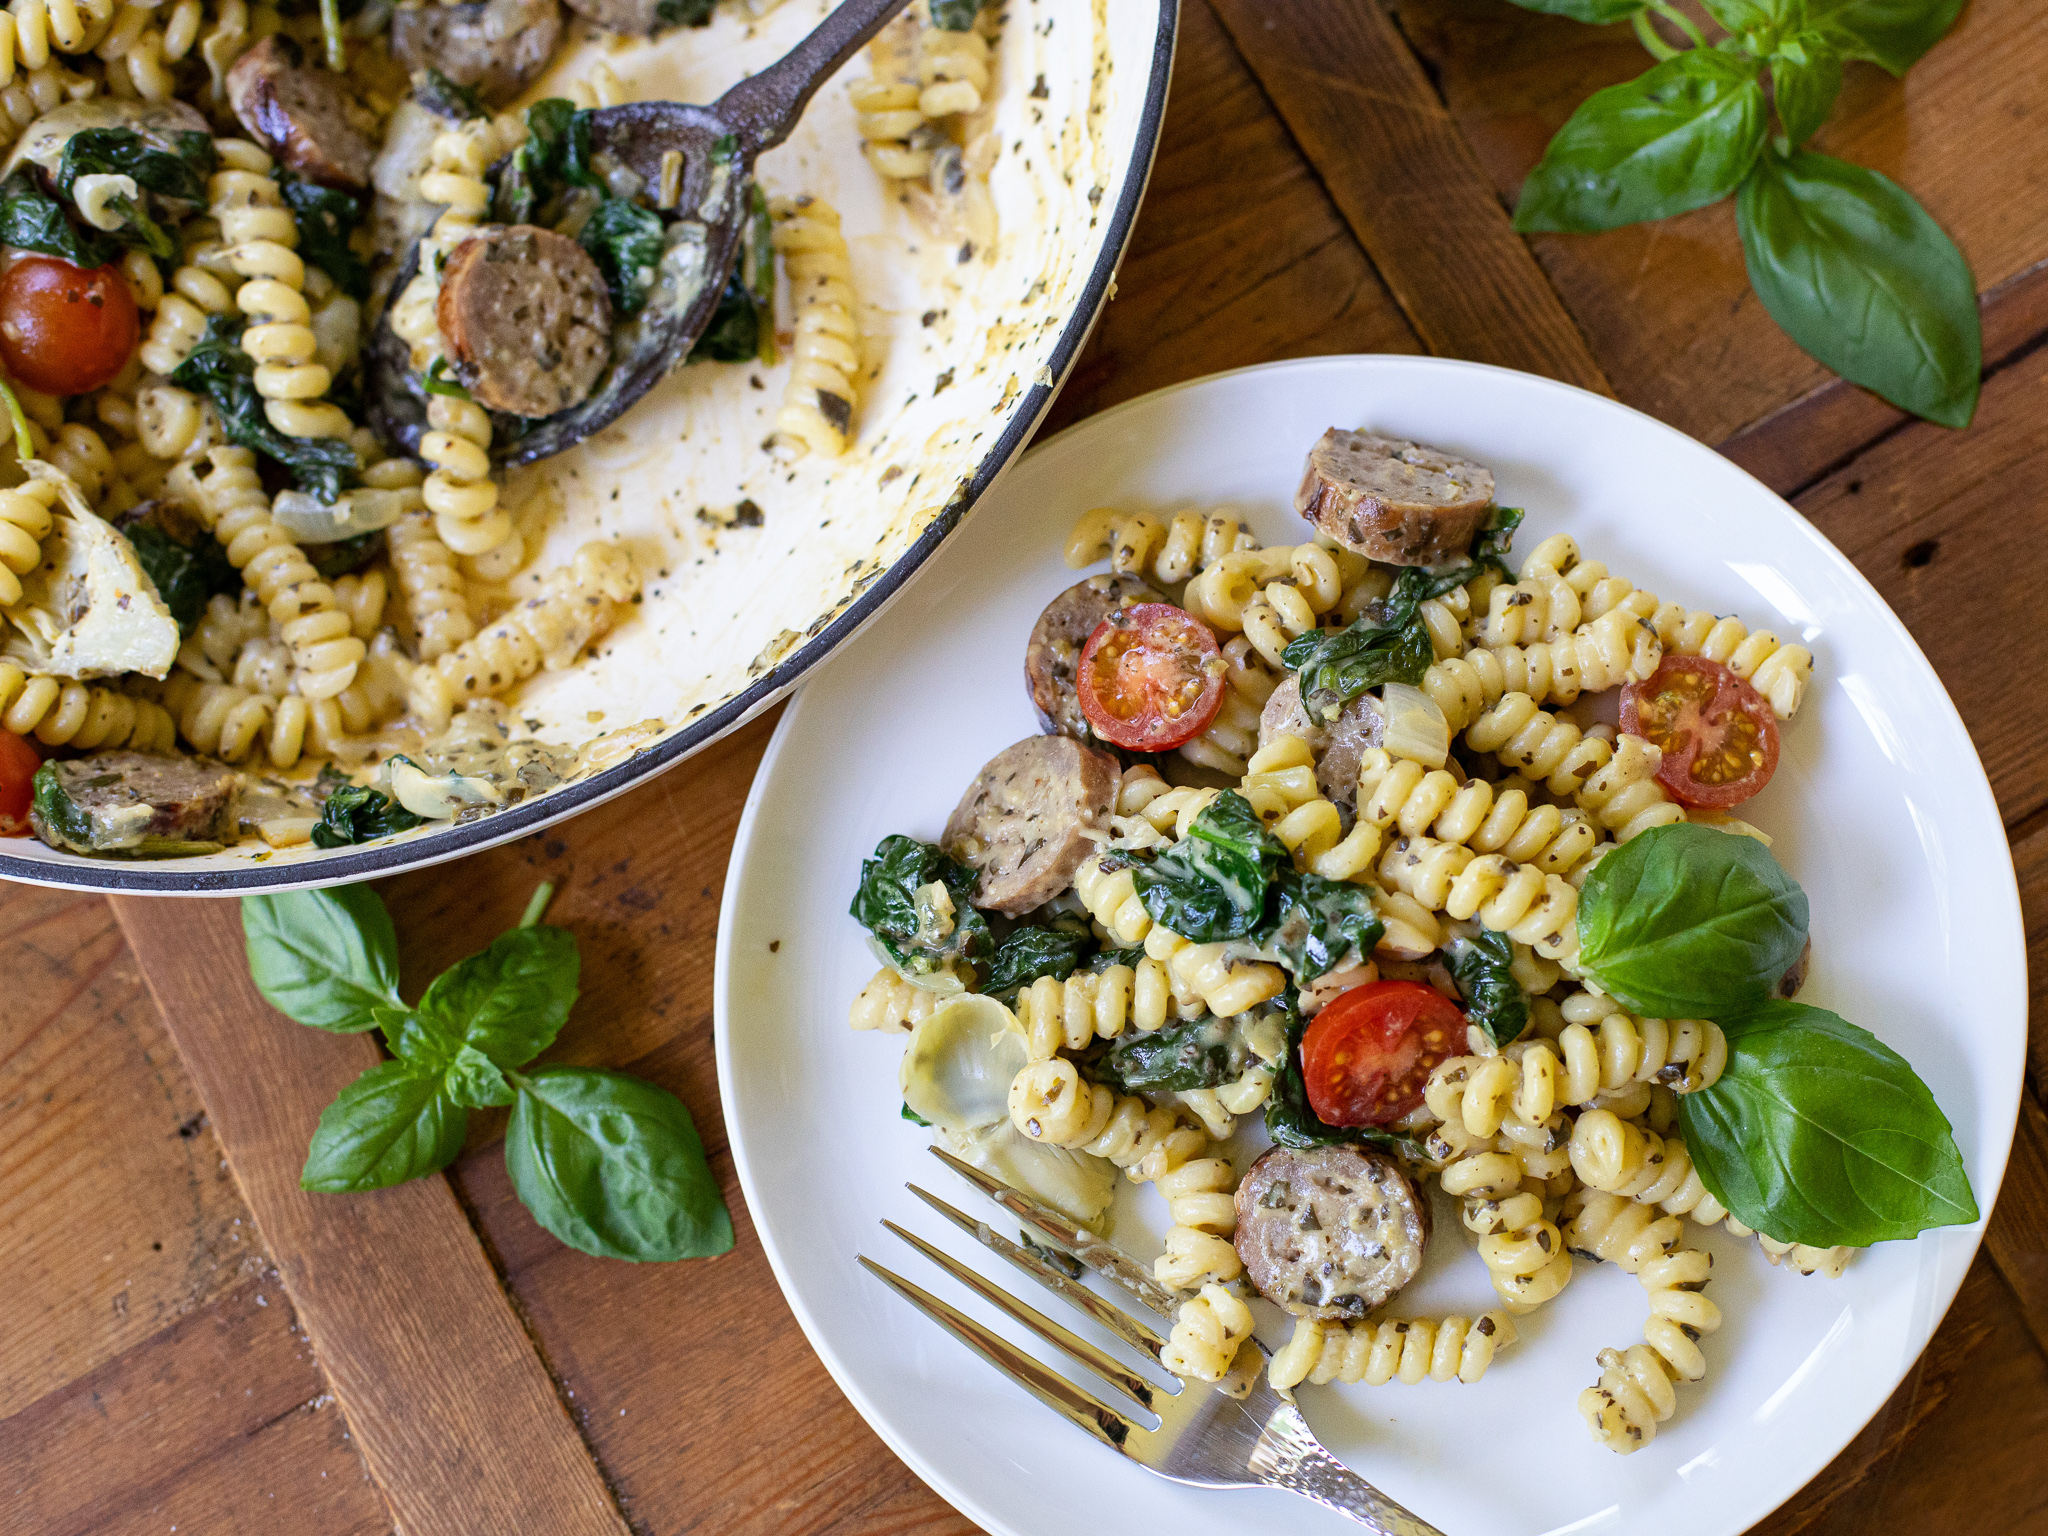 Creamy Spinach & Artichoke Pasta with Sausage – Try It With Delicious Carando Sausage And Save NOW At Publix